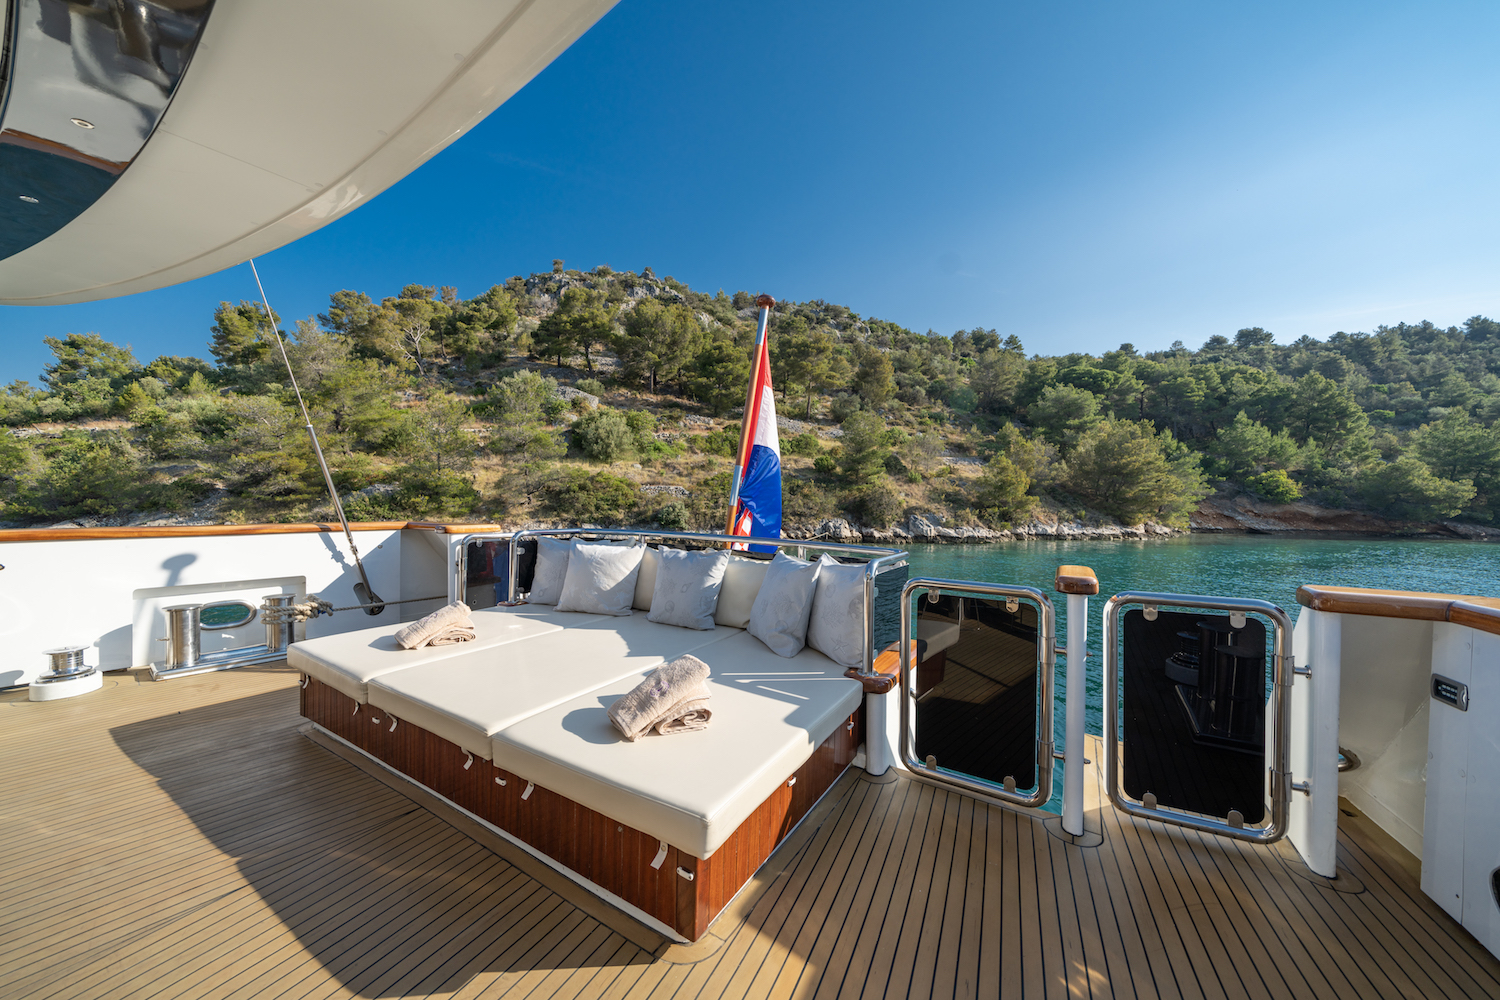 Aft Deck Sunbathing And Relaxation